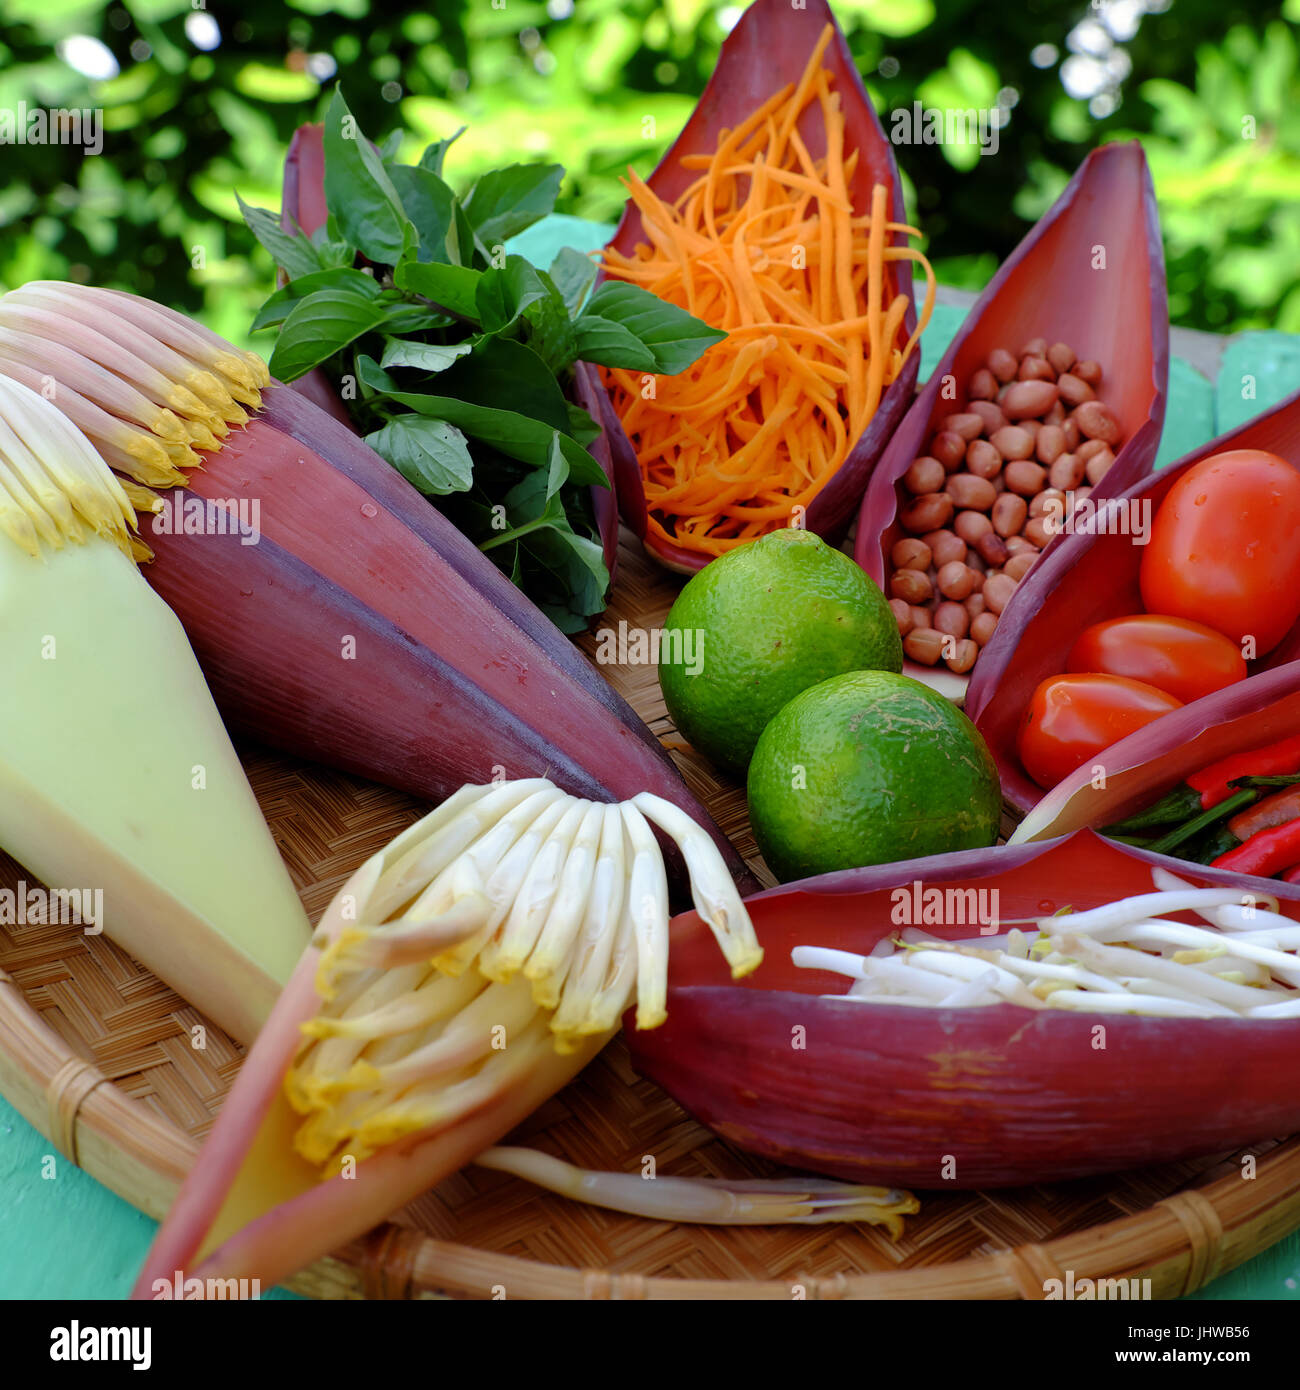 Vegetarian food from vegetable, banana flower, banana petal, carrot, peanut, bean sprouts, herbs mix with sauce to make diet salad and healthy eating Stock Photo